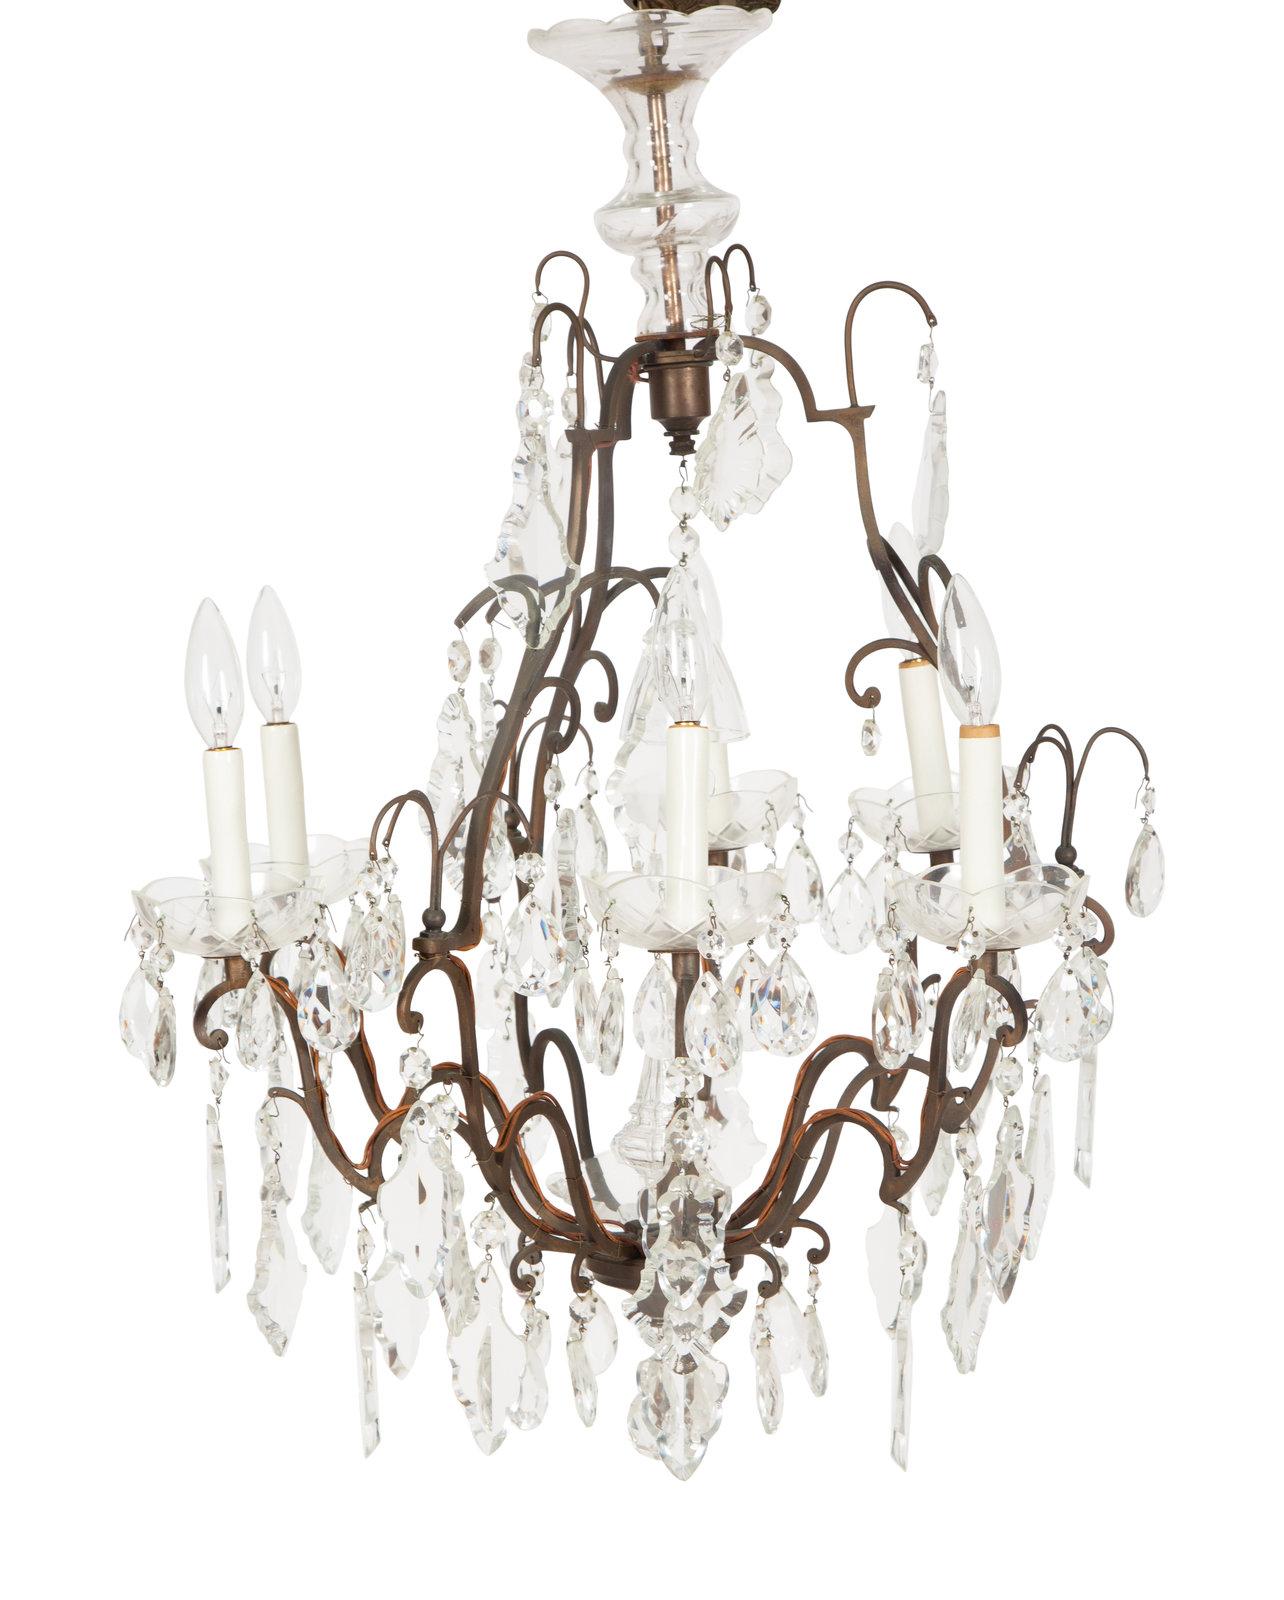 French Louis XV Style Cut Glass and Gilt Metal Chandelier 19th/20th Century For Sale